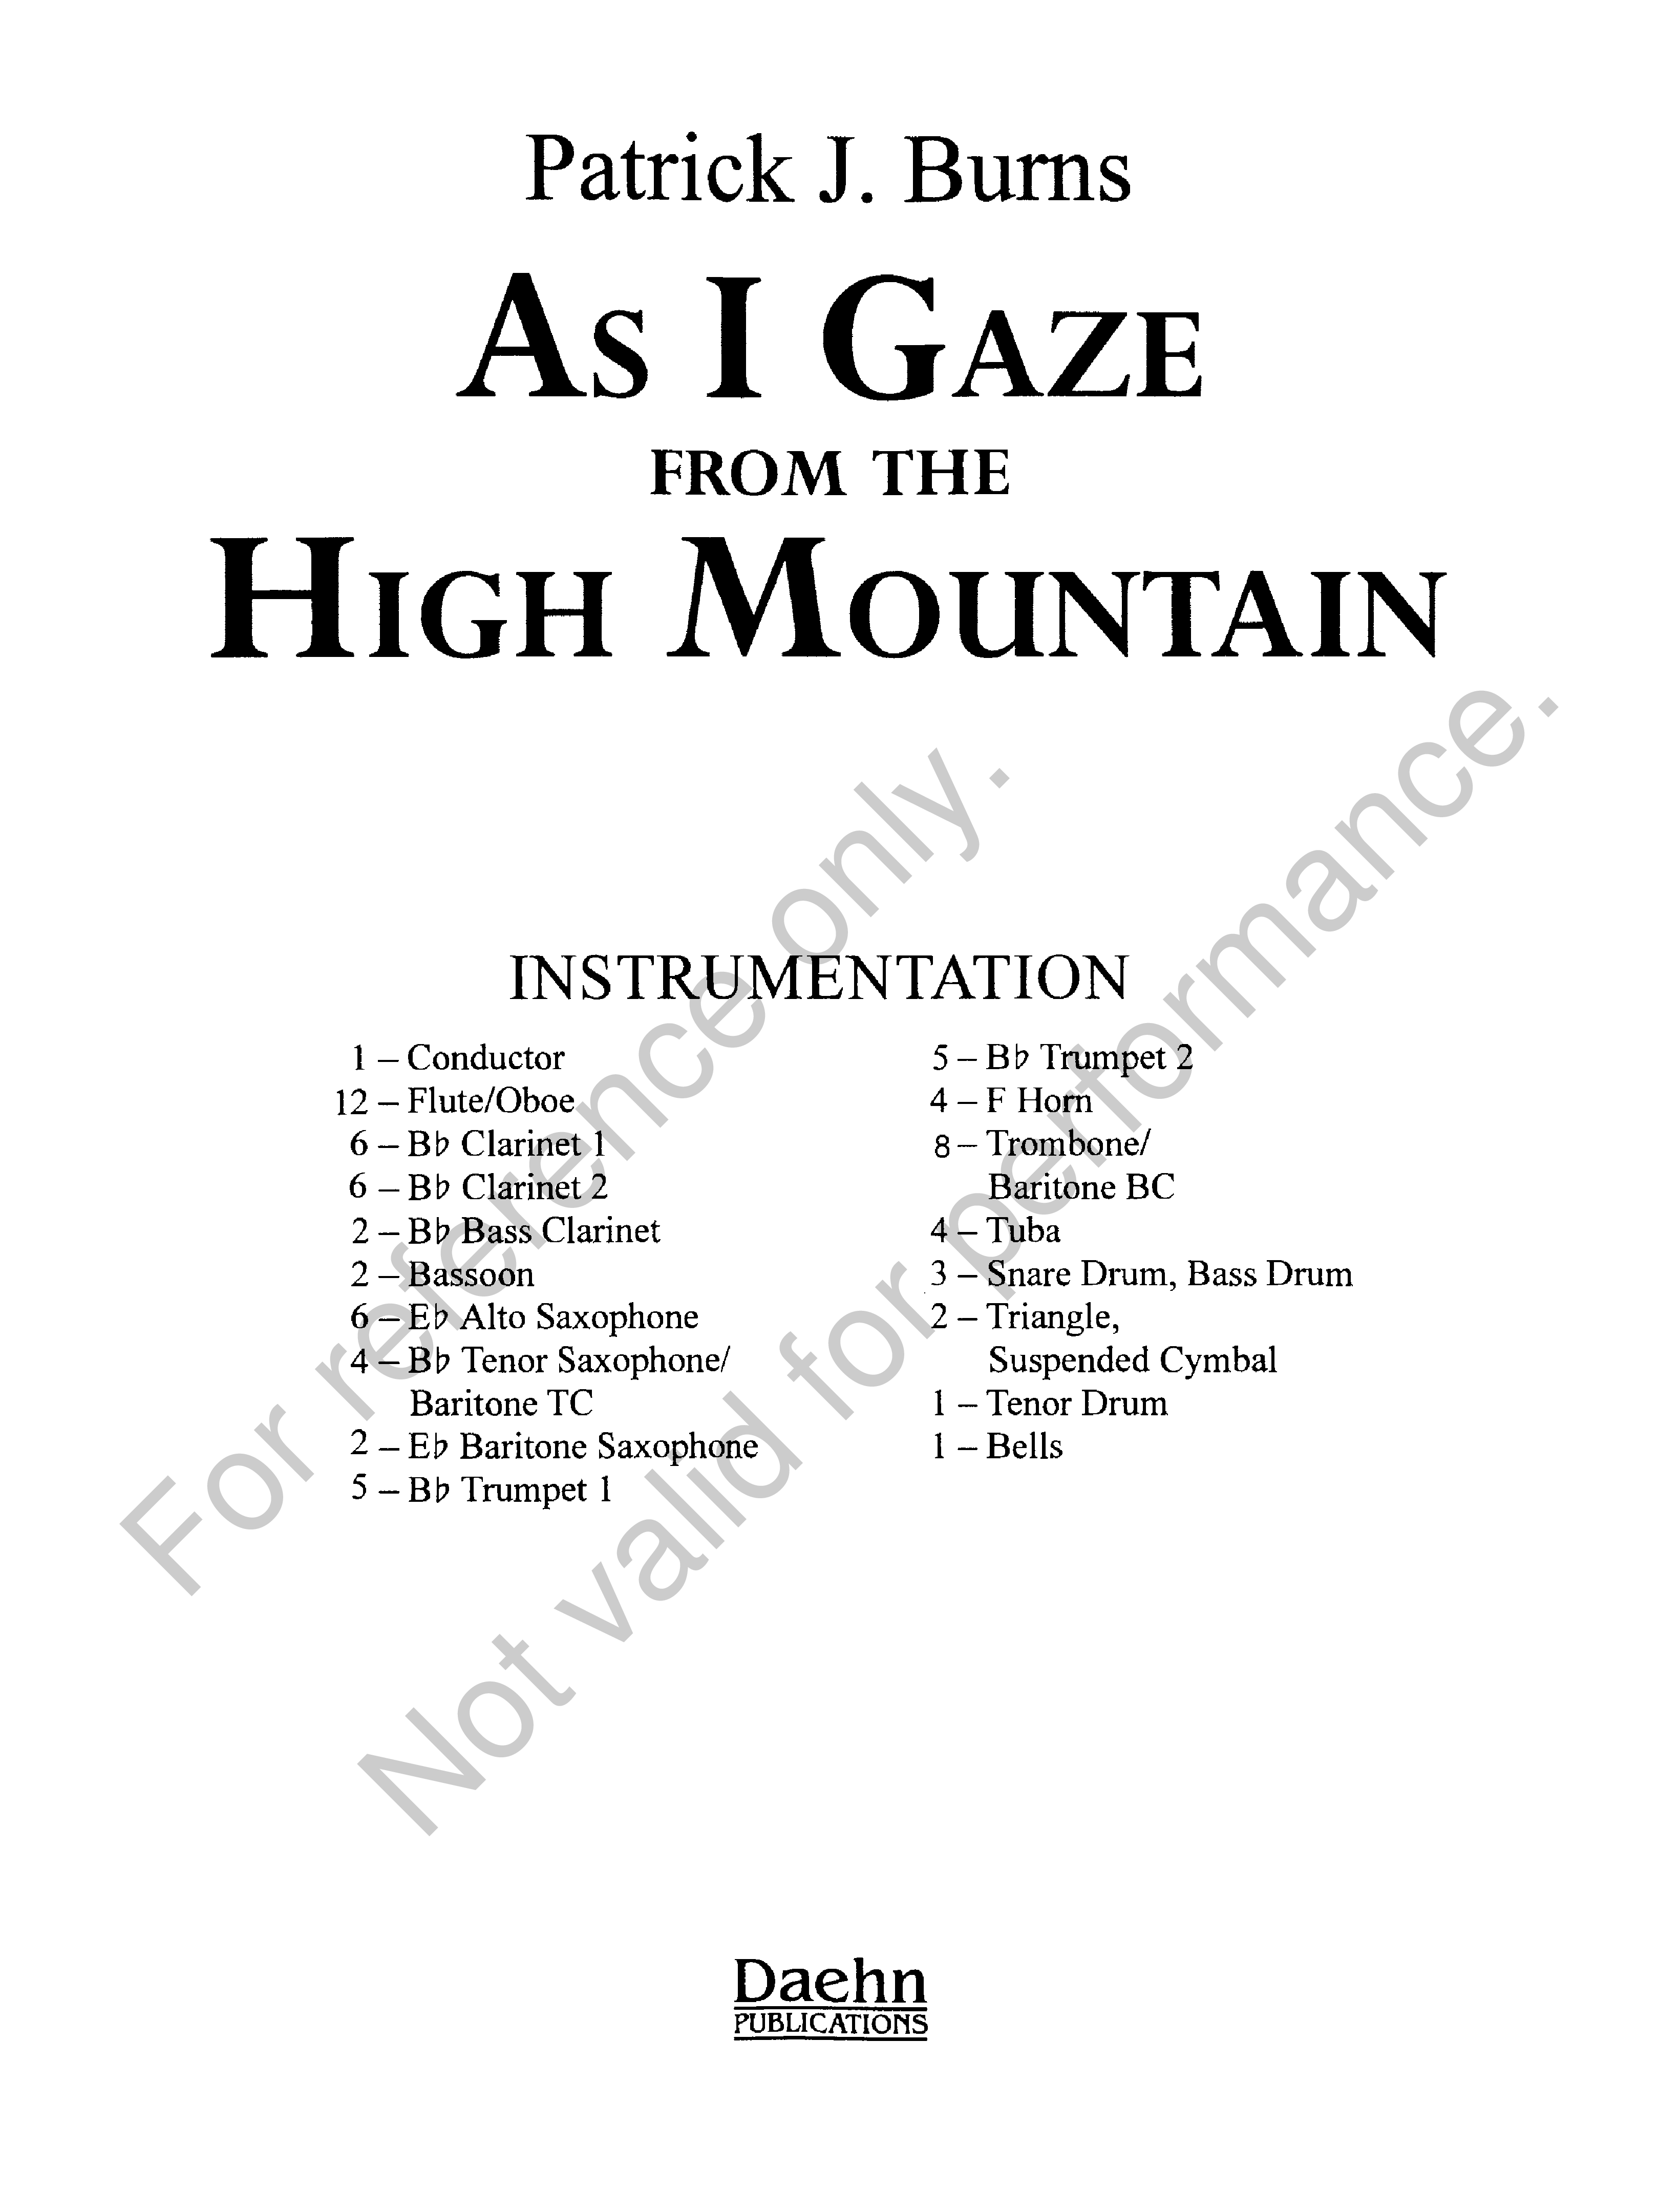 AS I GAZE FROM THE HIGH MOUNTAIN